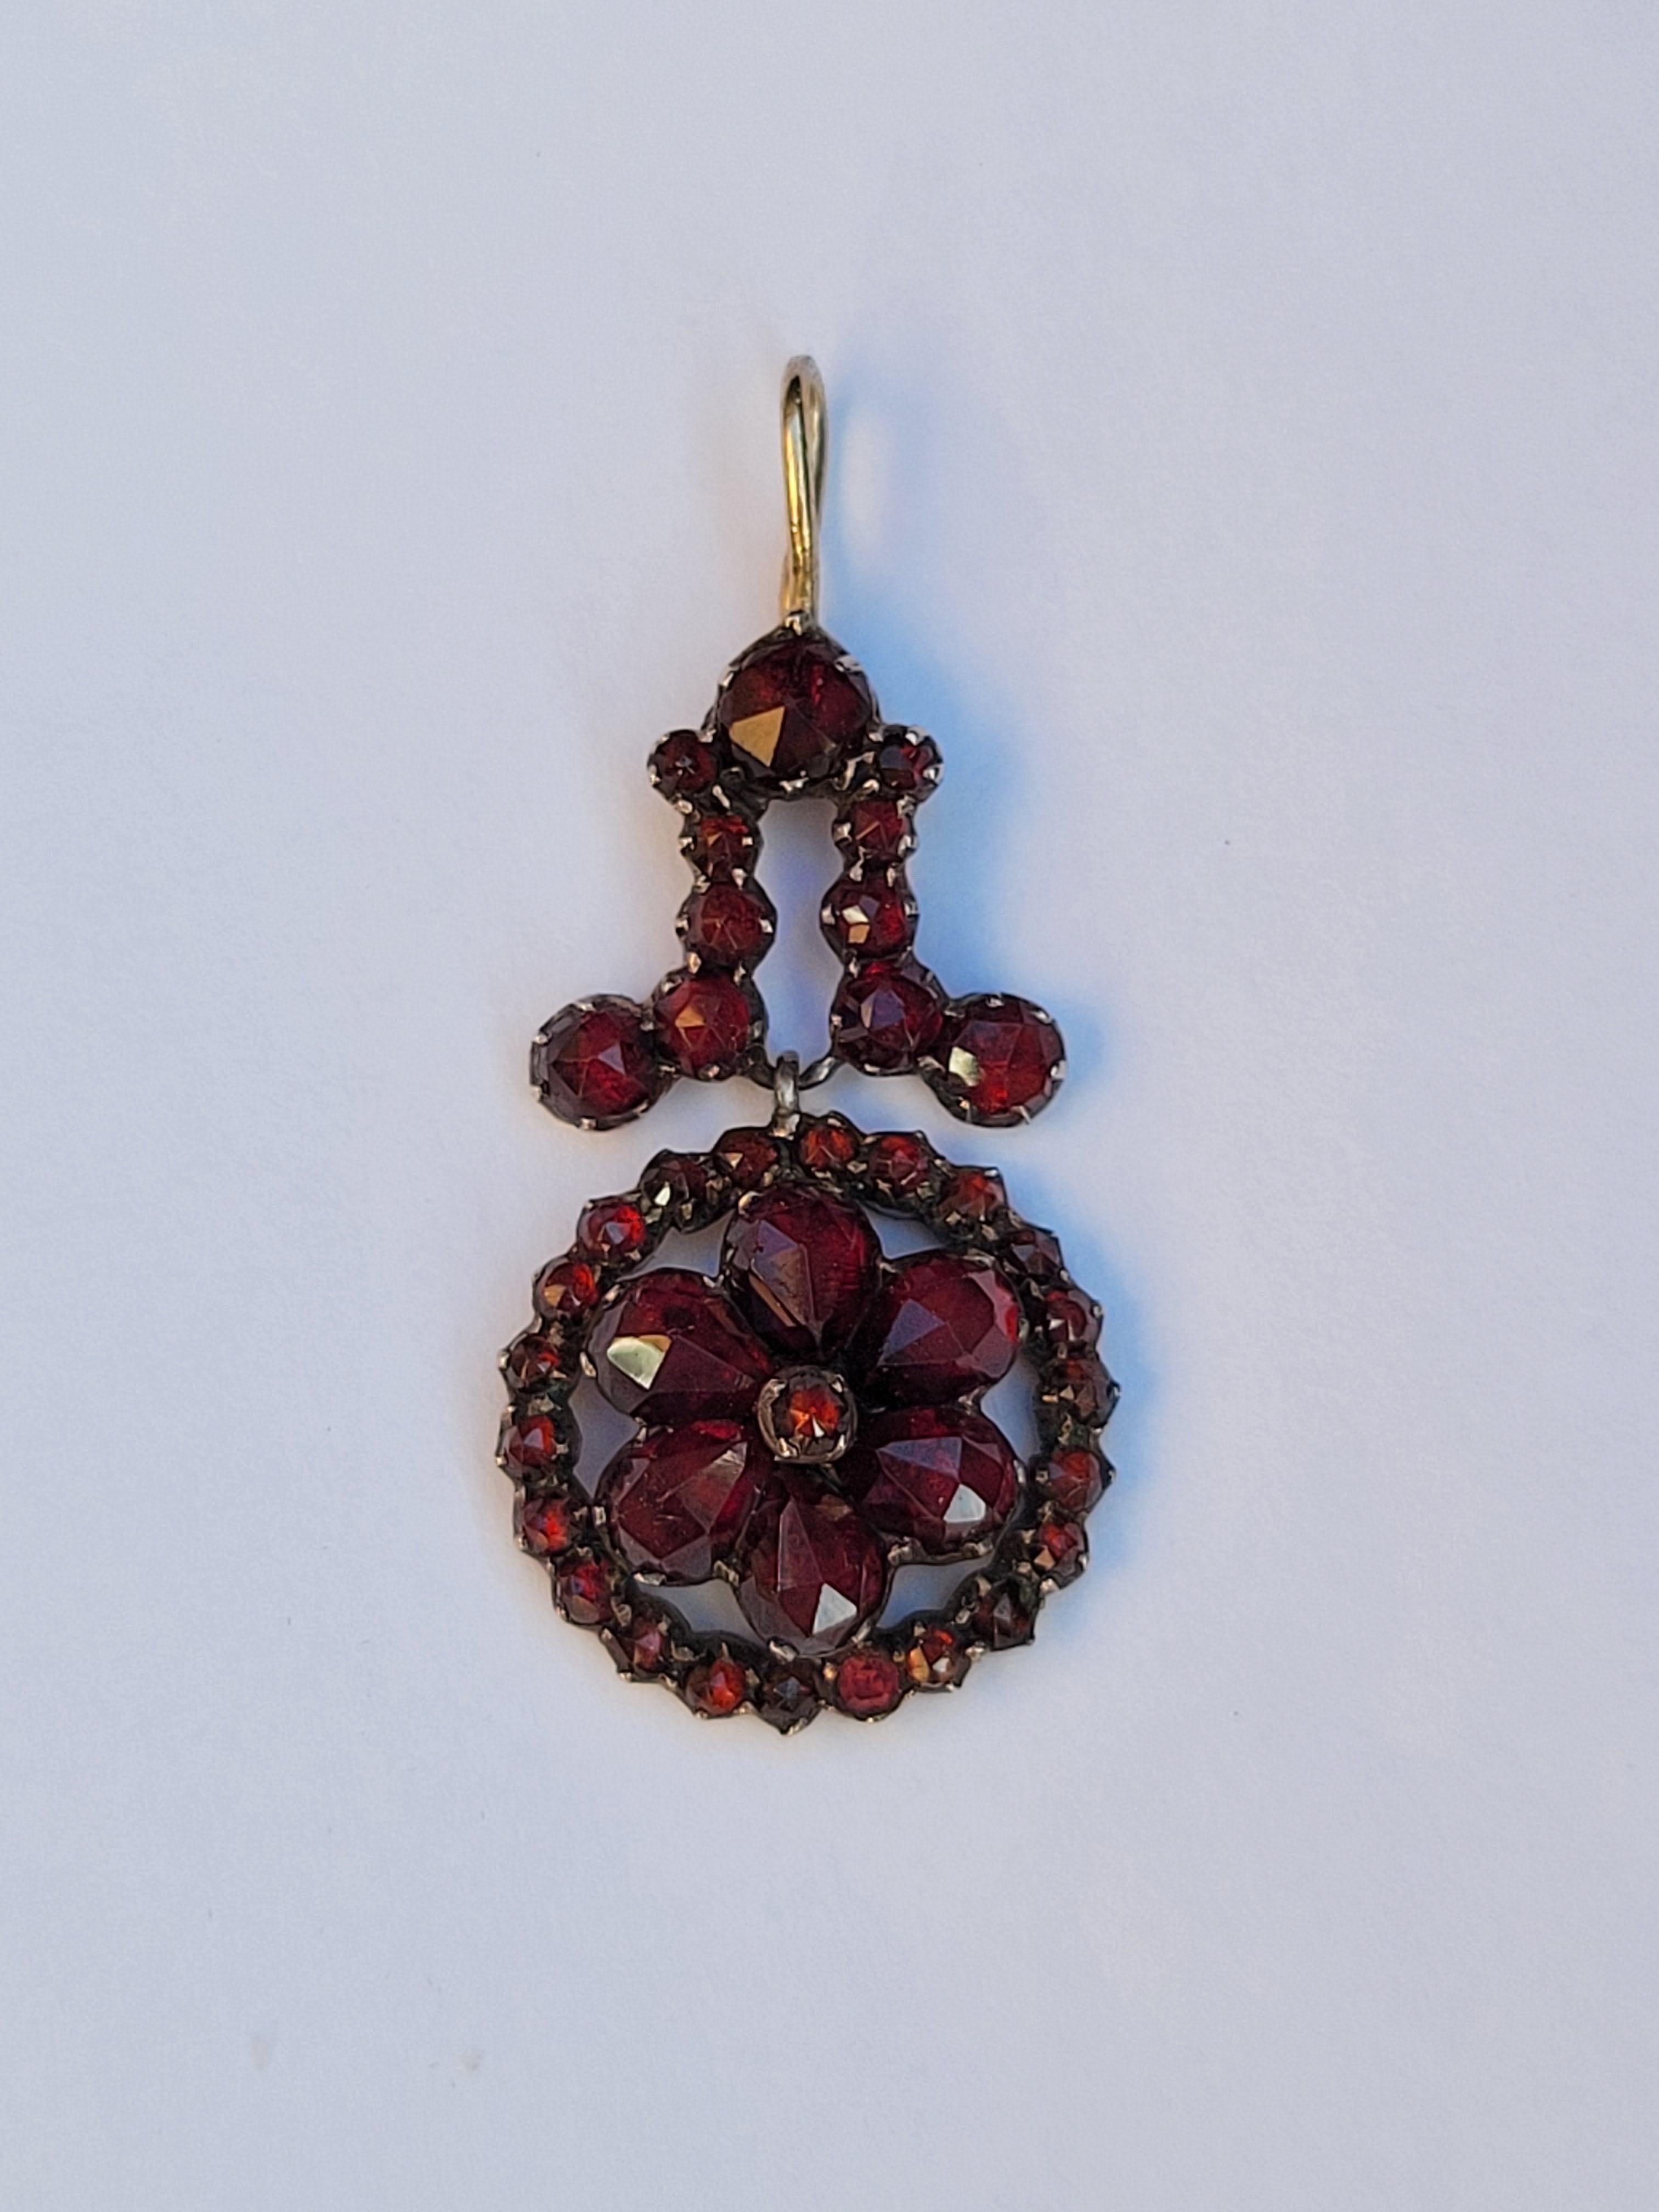 A lovely antique Victorian (c. 1890) rose-cut Bohemian garnet flower pendant. The pendant is complete with a late gold bale and perfect as an everyday or special occasion piece of jewelry.

Garnet stone of passionate love and friendship, also